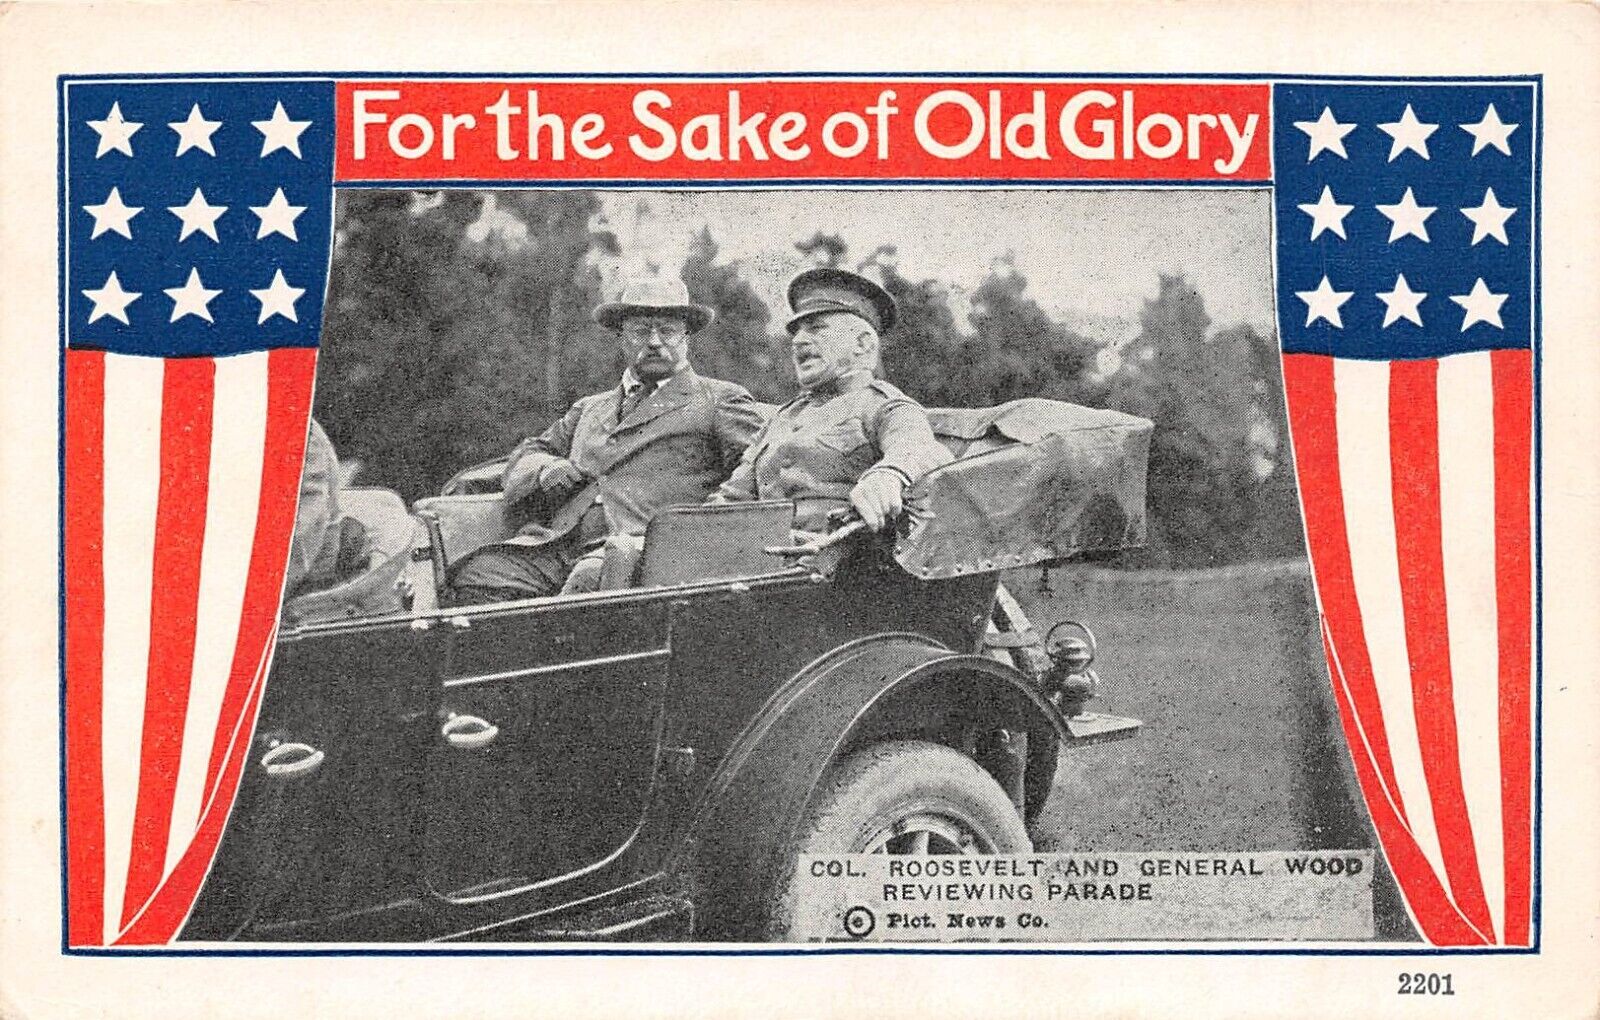 WWI Military For The Sake of Old Glory ROOSEVELT & GEN WOOD PARADE Postcard